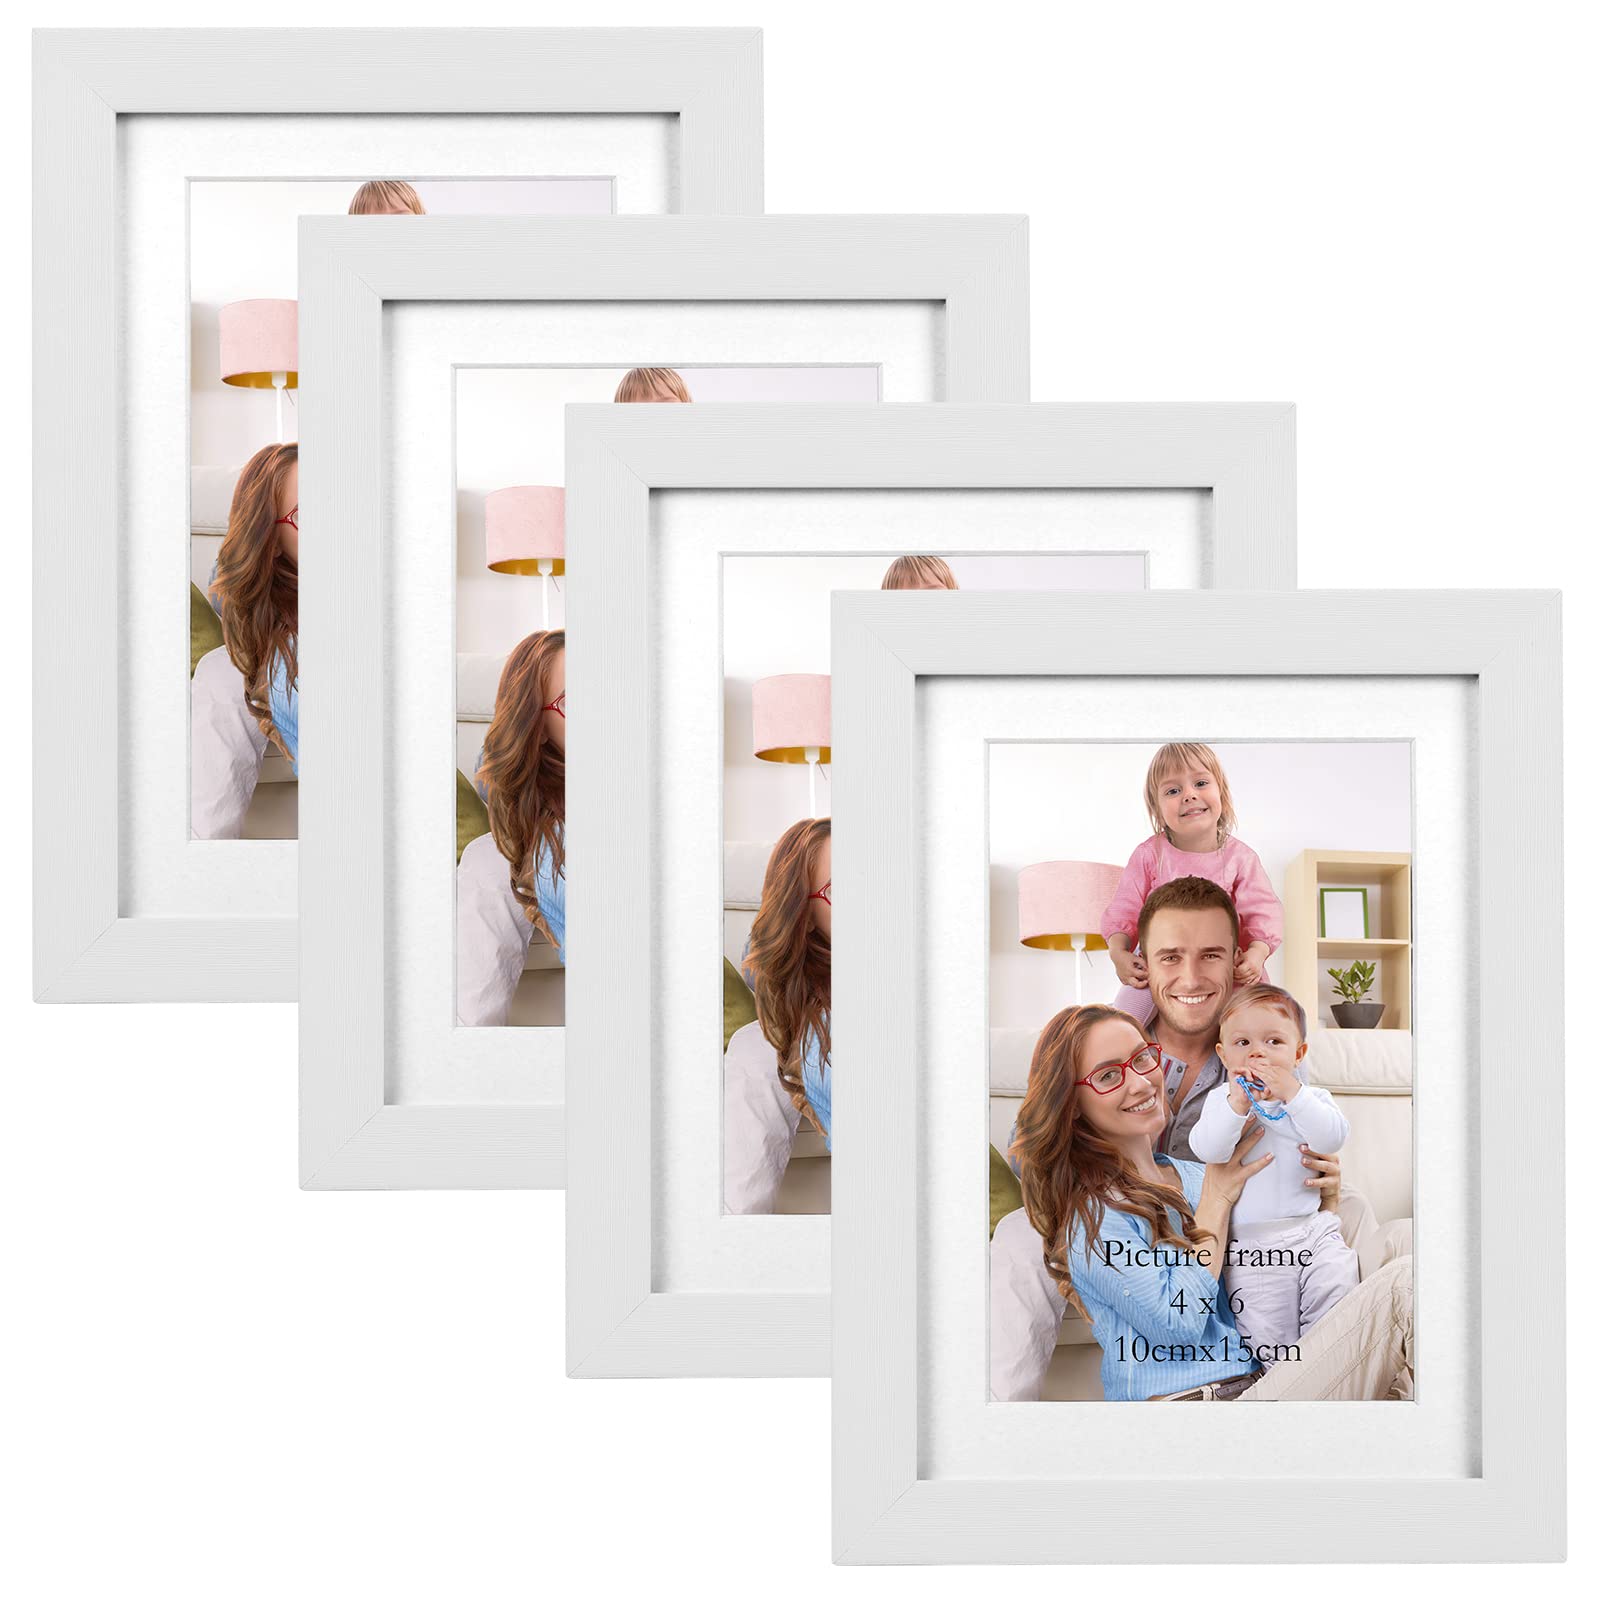 giftgarden 4x6 Picture Frame Set of 4 White Wood grain Frames for 4x6 Photos with Mat or 5x7 Without Mat, Wall or Tabletop Displ